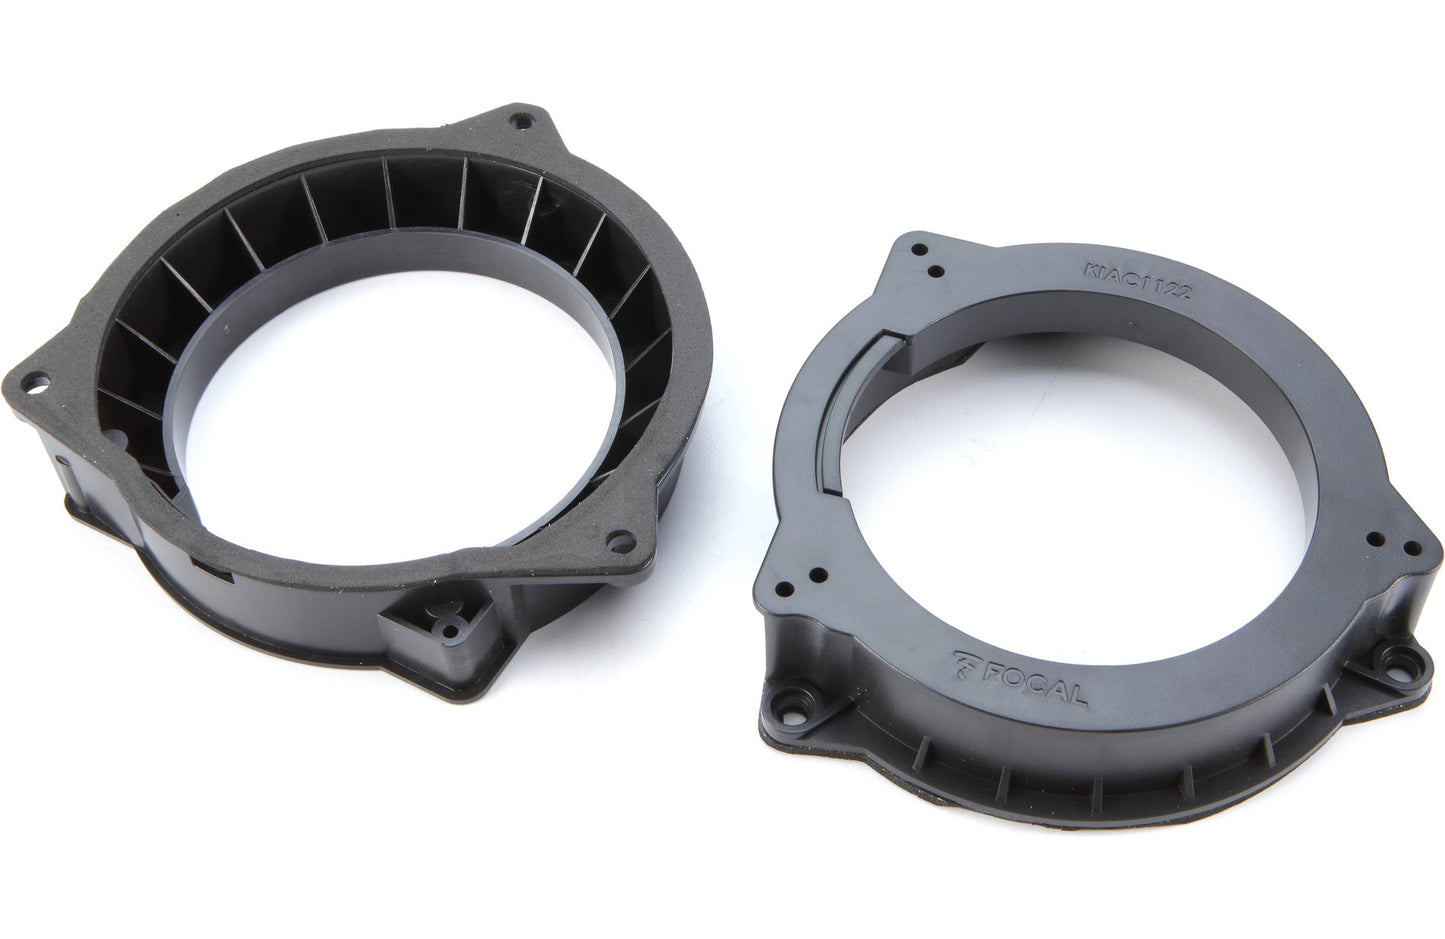 Focal Inside X5 and X6 Spacer Kit Brackets and spacers for installing Focal speakers in select BMW X5 and X6 models